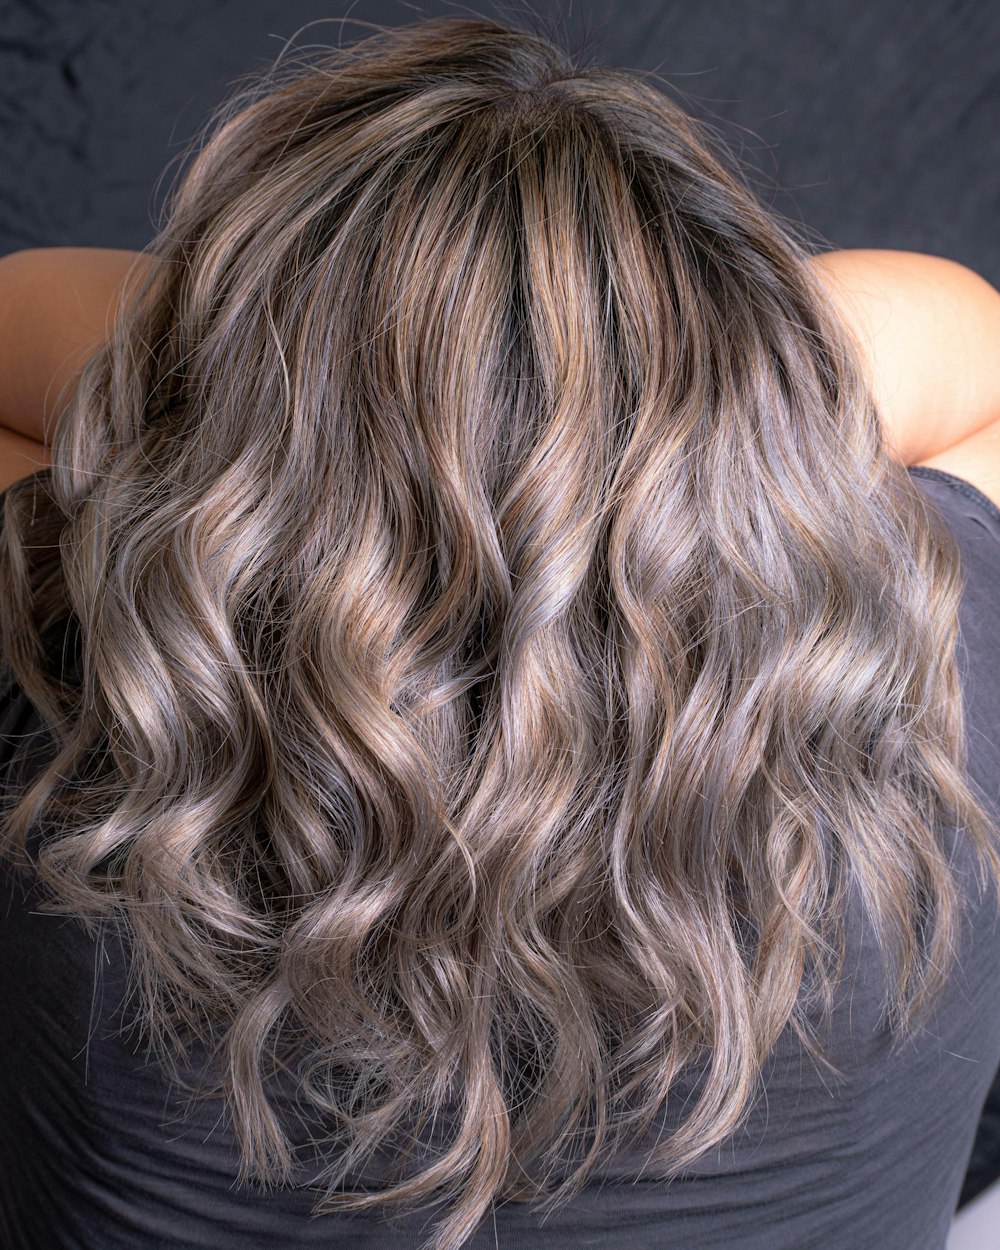 Balayage Pictures | Download Free Images on Unsplash